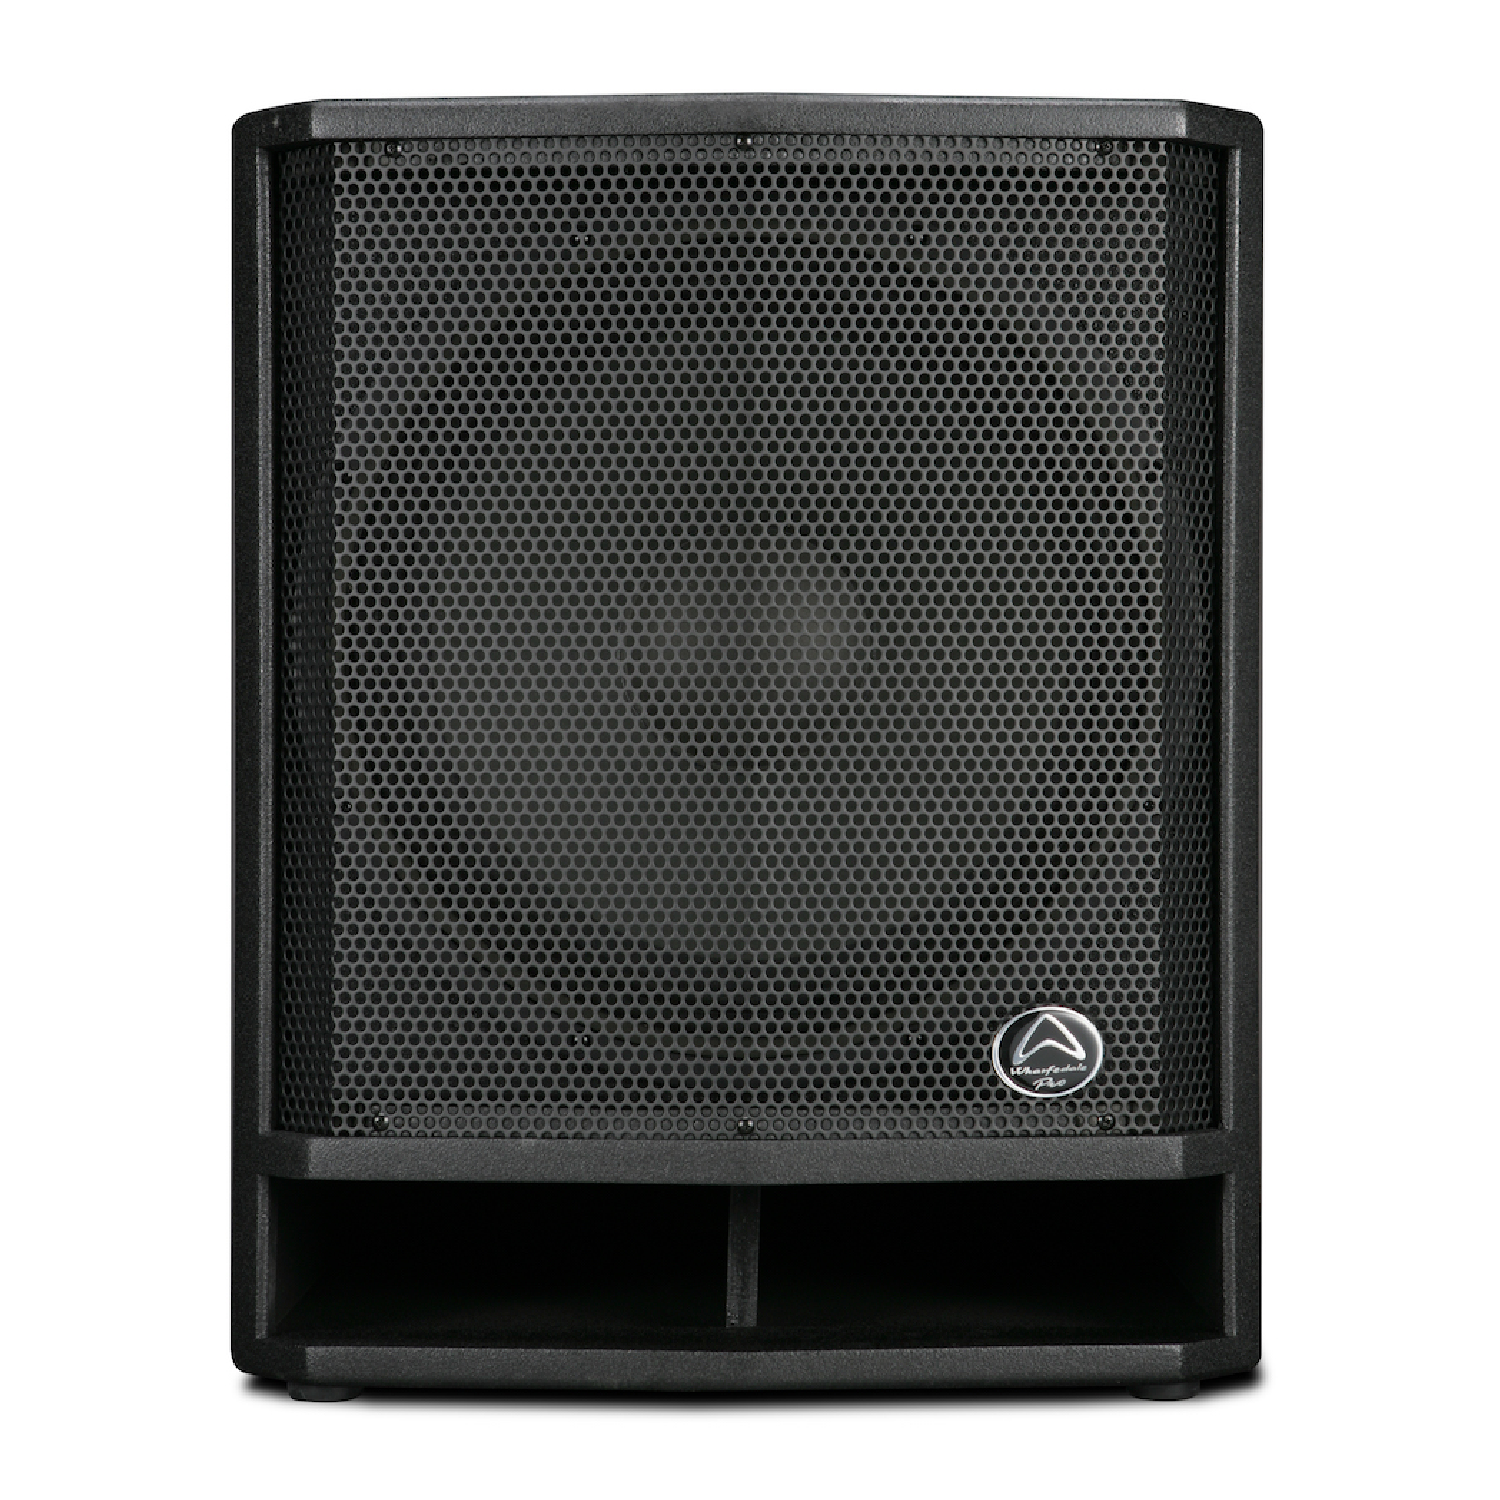 18 Inch Subwoofer RMS: 500 watts DVP X18B wharfedale